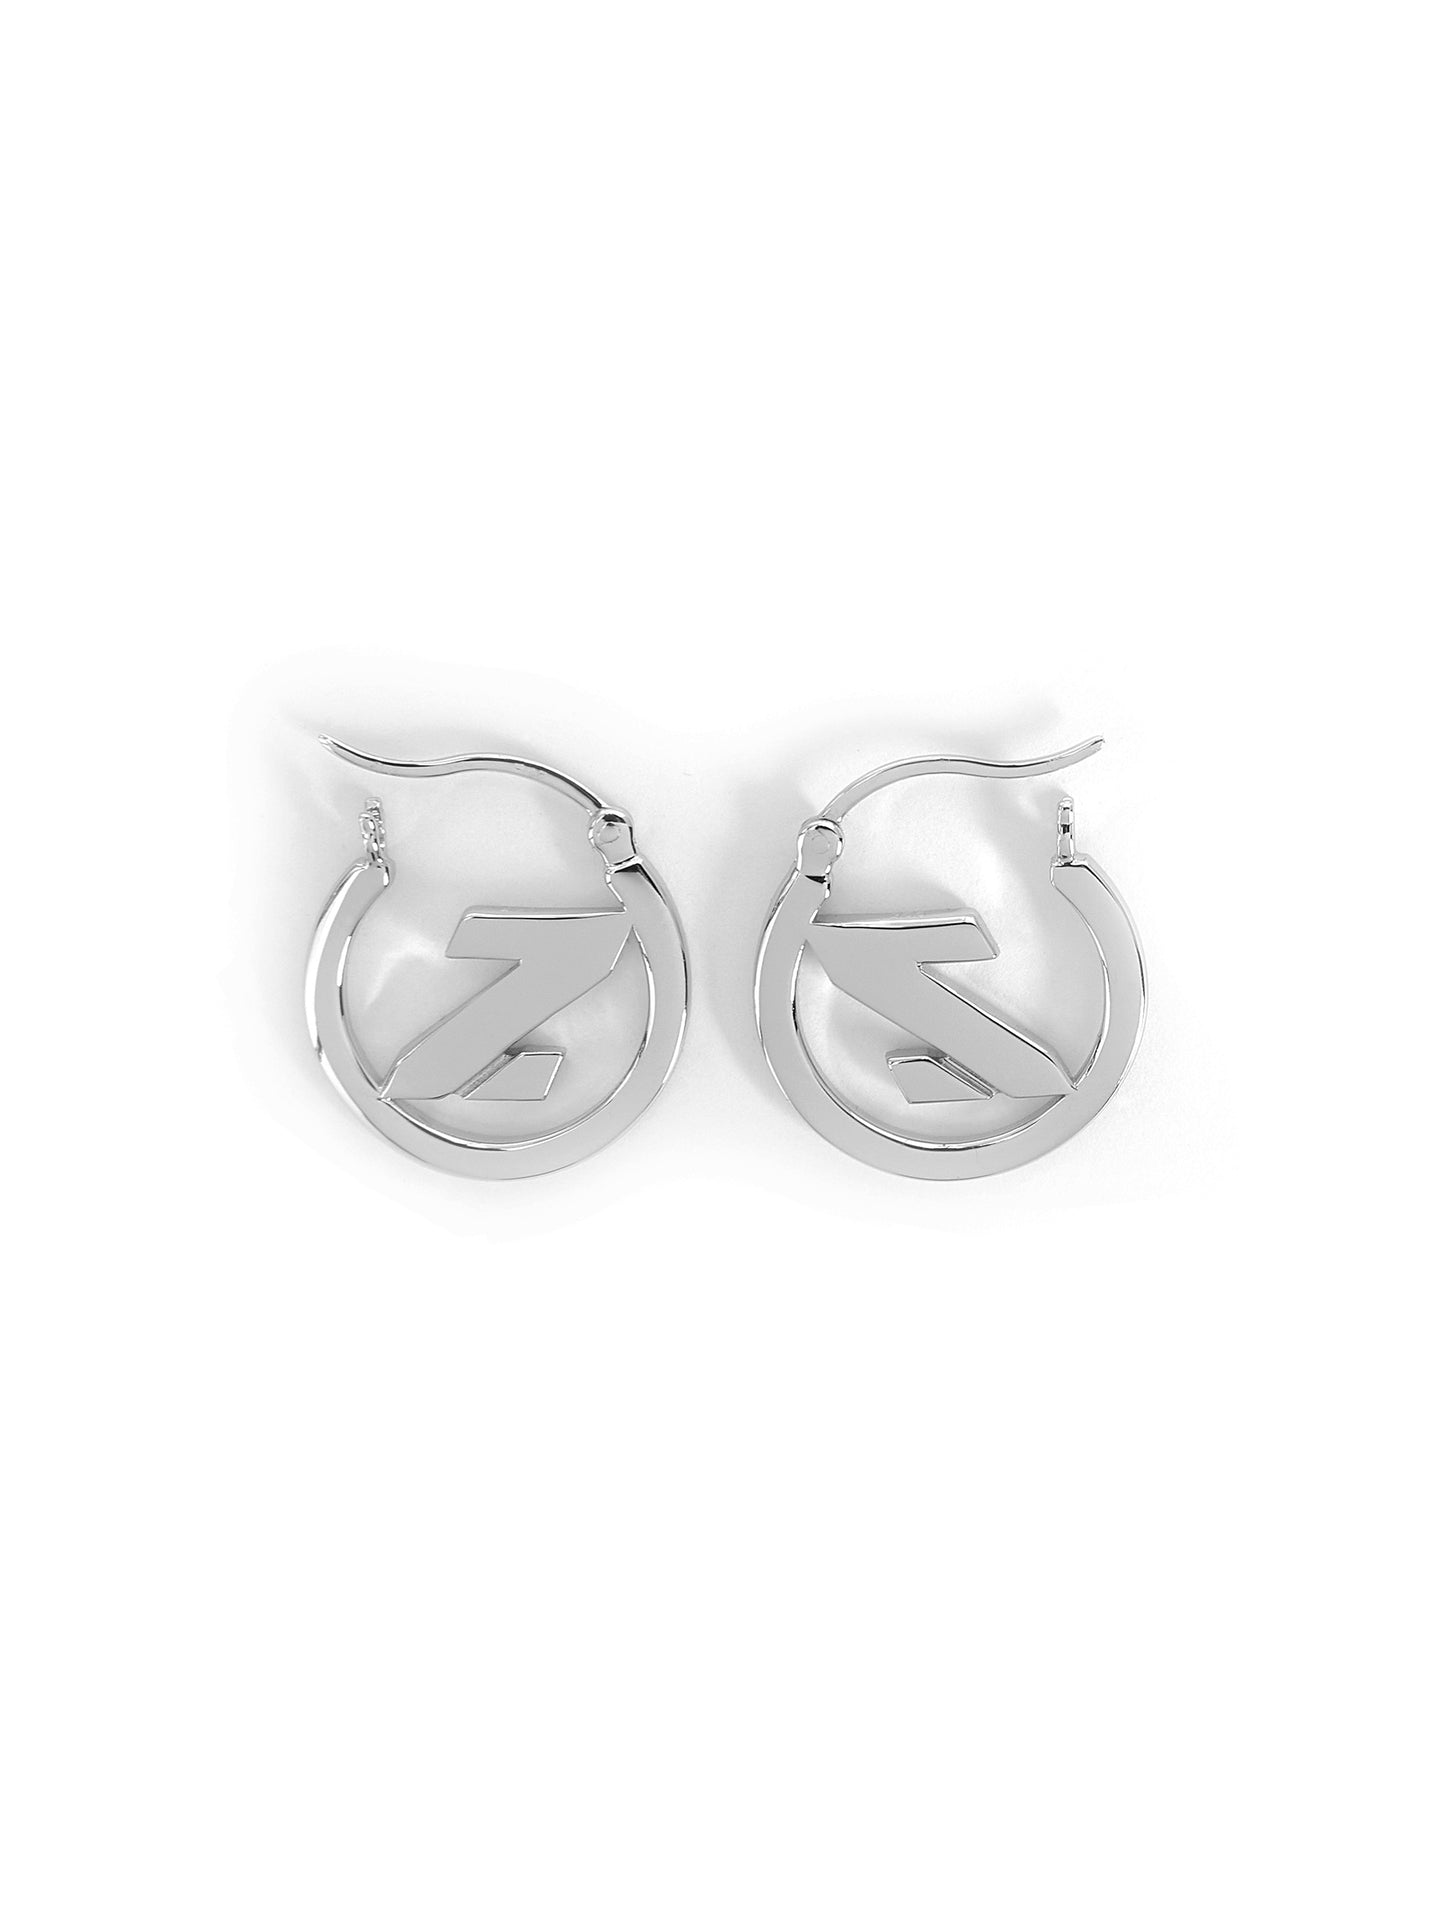 Mini Z Hoop Earrings (For China shipping only)